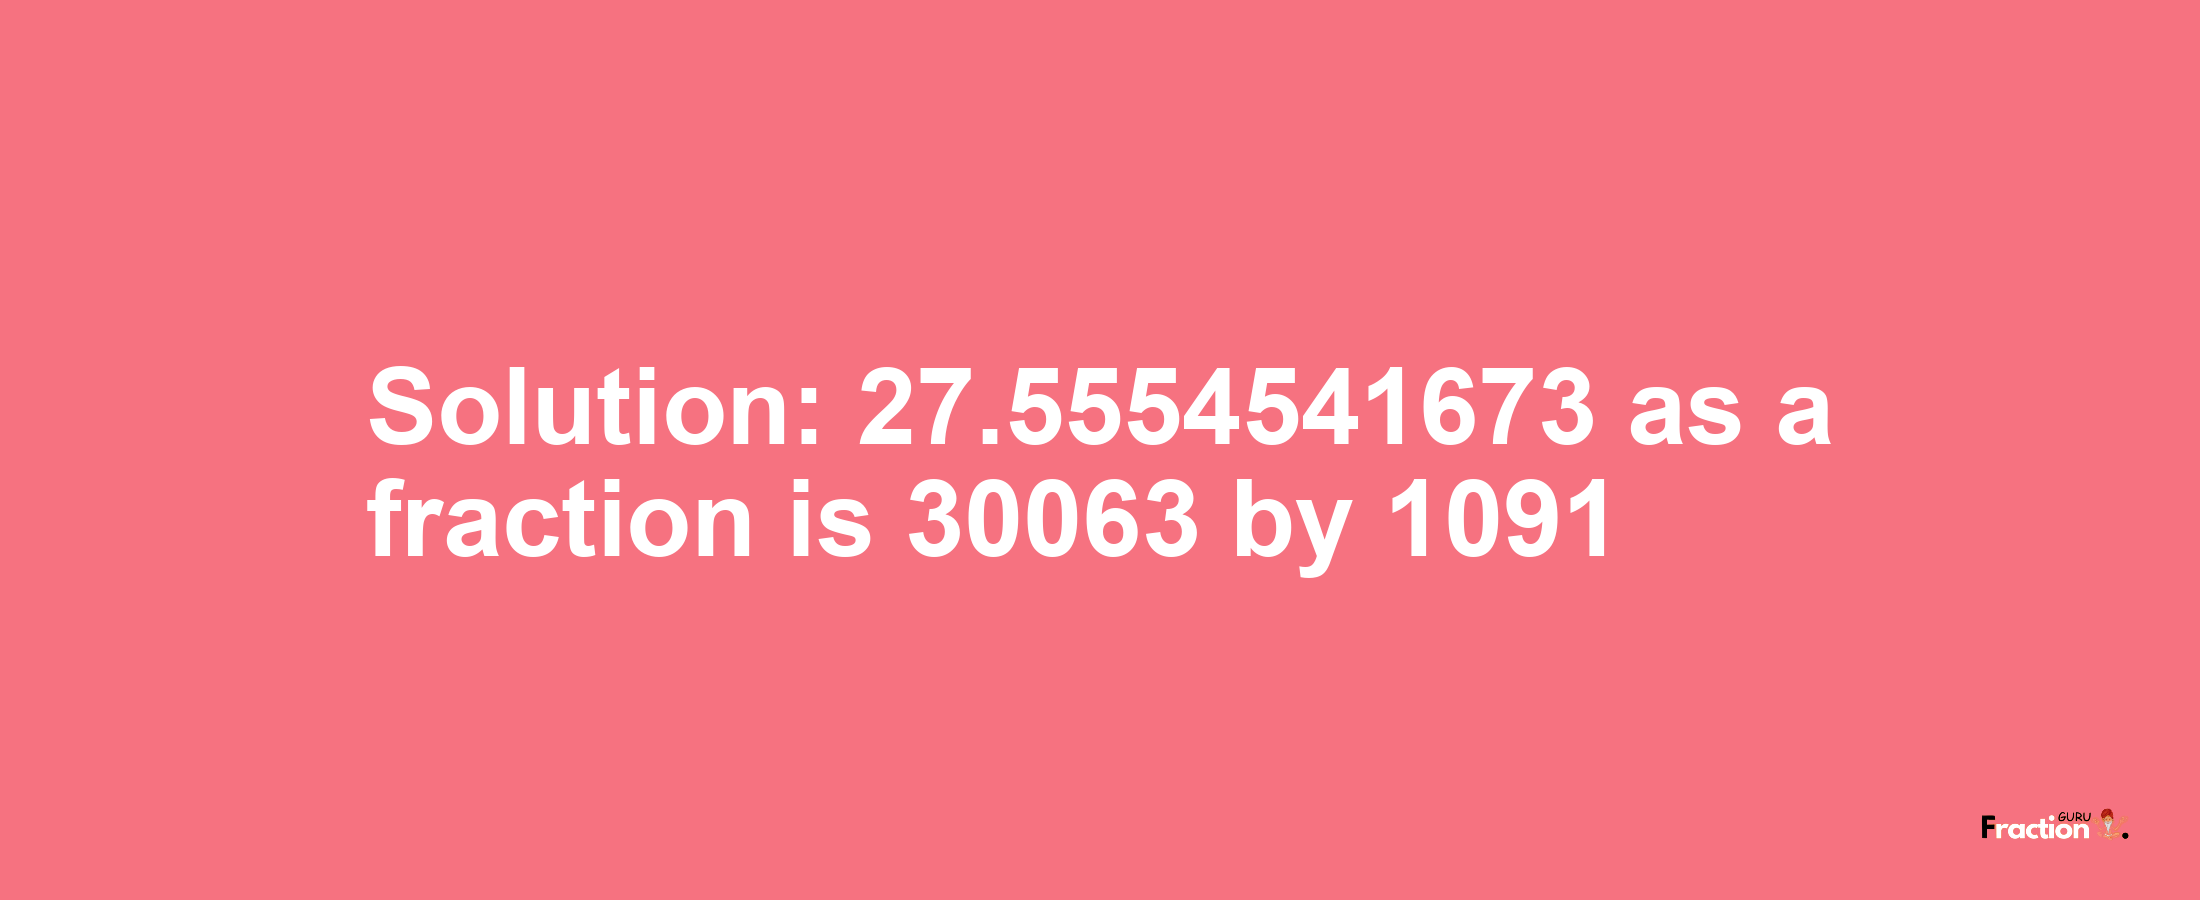 Solution:27.5554541673 as a fraction is 30063/1091